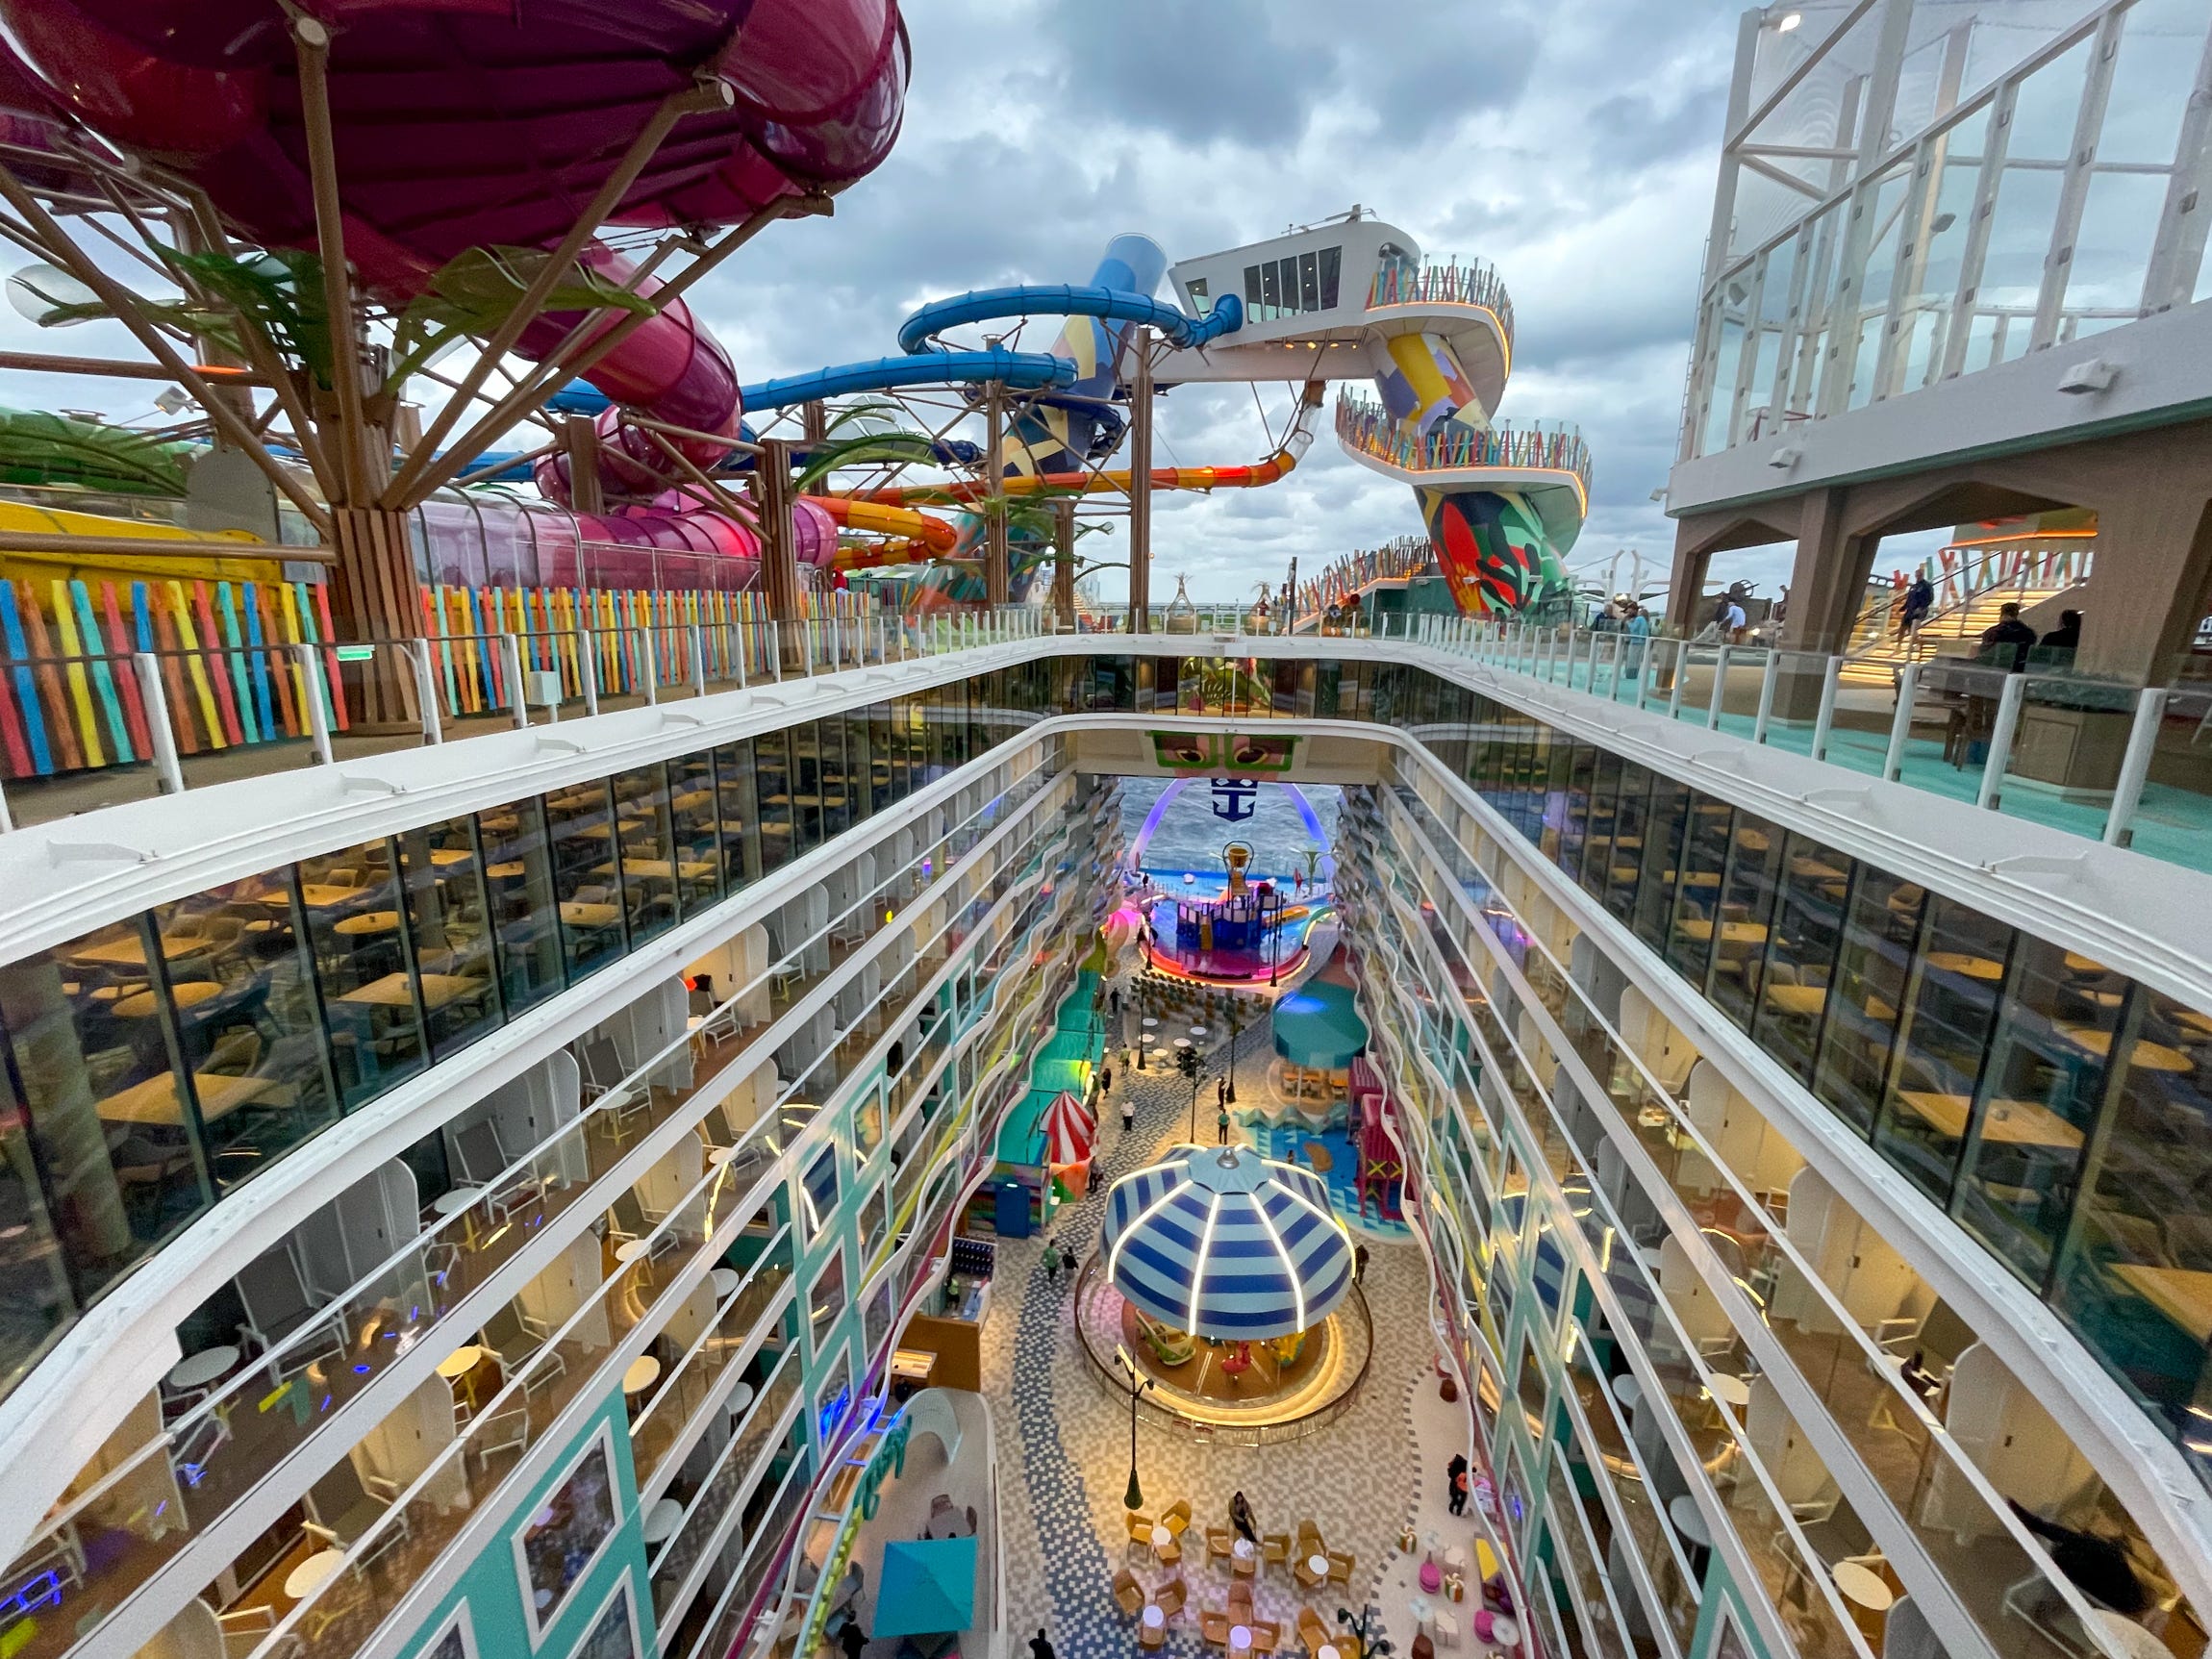 <p>Like other cruise lines, the company now aims to poach families considering land-based vacations. Think US theme park capital, Orlando.</p><p>"We've started this transition from being a traditional cruise vacation to being a multi-generational family option that stands shoulder-to-shoulder with Orlando and Las Vegas," Jason Liberty, the president and CEO of Royal Caribbean Group, told investors in February.</p><p>To do this, Royal Caribbean has been "acutely focused" on this family segment, Michael Bayley, the president and CEO of Royal Caribbean International, told investors on the same call. "And I think <a href="https://www.businessinsider.com/photos-royal-caribbean-new-icon-of-the-seas-cruise-ship-2022-10">Icon of the Seas</a> is a great example of that."</p>